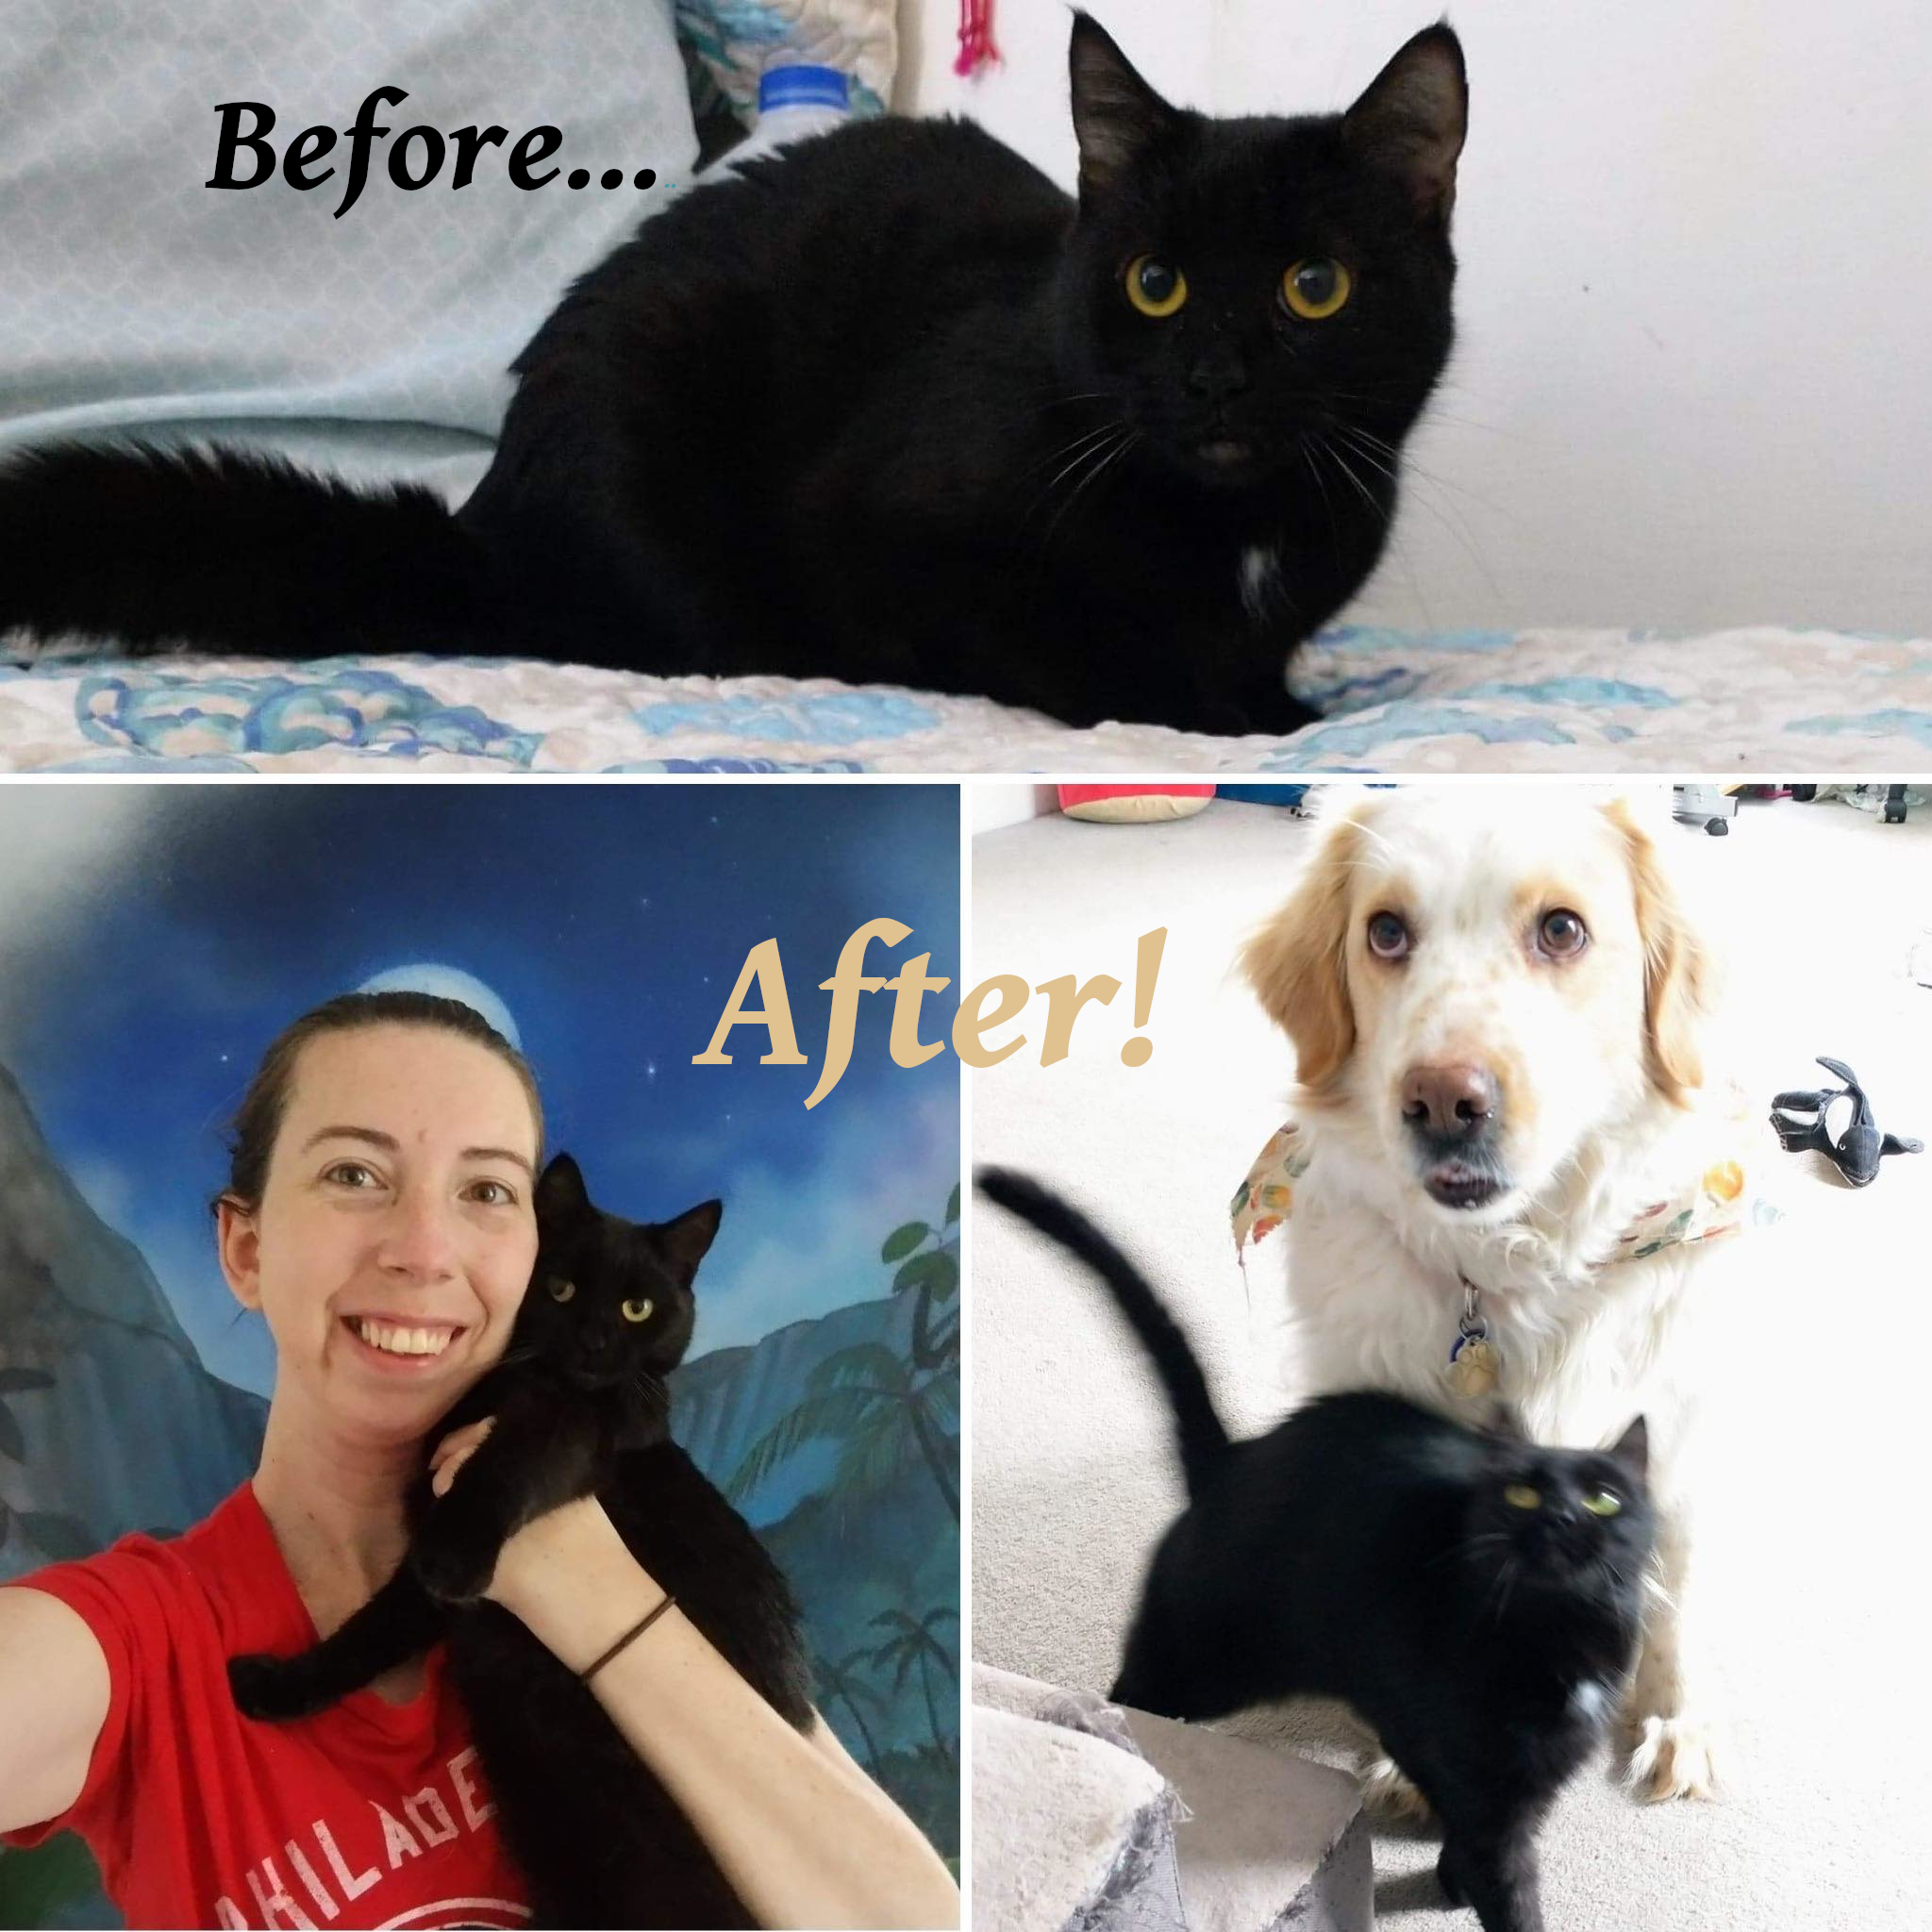 collage of 3 pictures. The top picture is a black cat whose fur is poofed from fear. The bottom left picture is the same cat being held snuggled by her smiling owner. The bottom right picture is the same cat rubbing against a cream-colored dog who looks somewhat bemused at the feline attention.